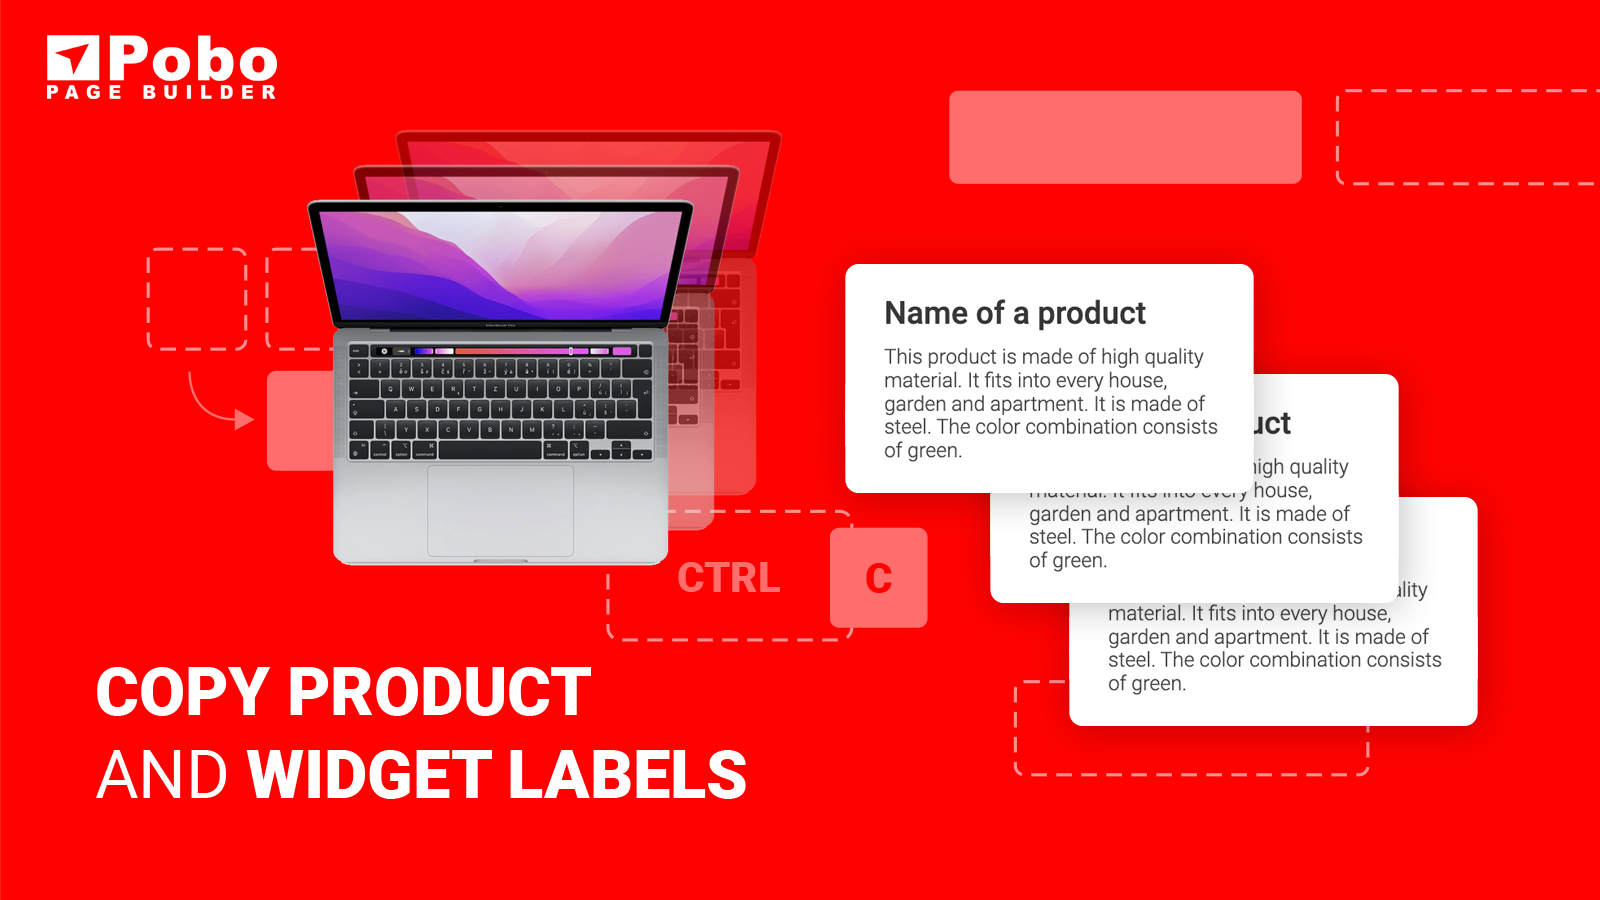 Copy product and widget labels. Over 50+ widgets and templates